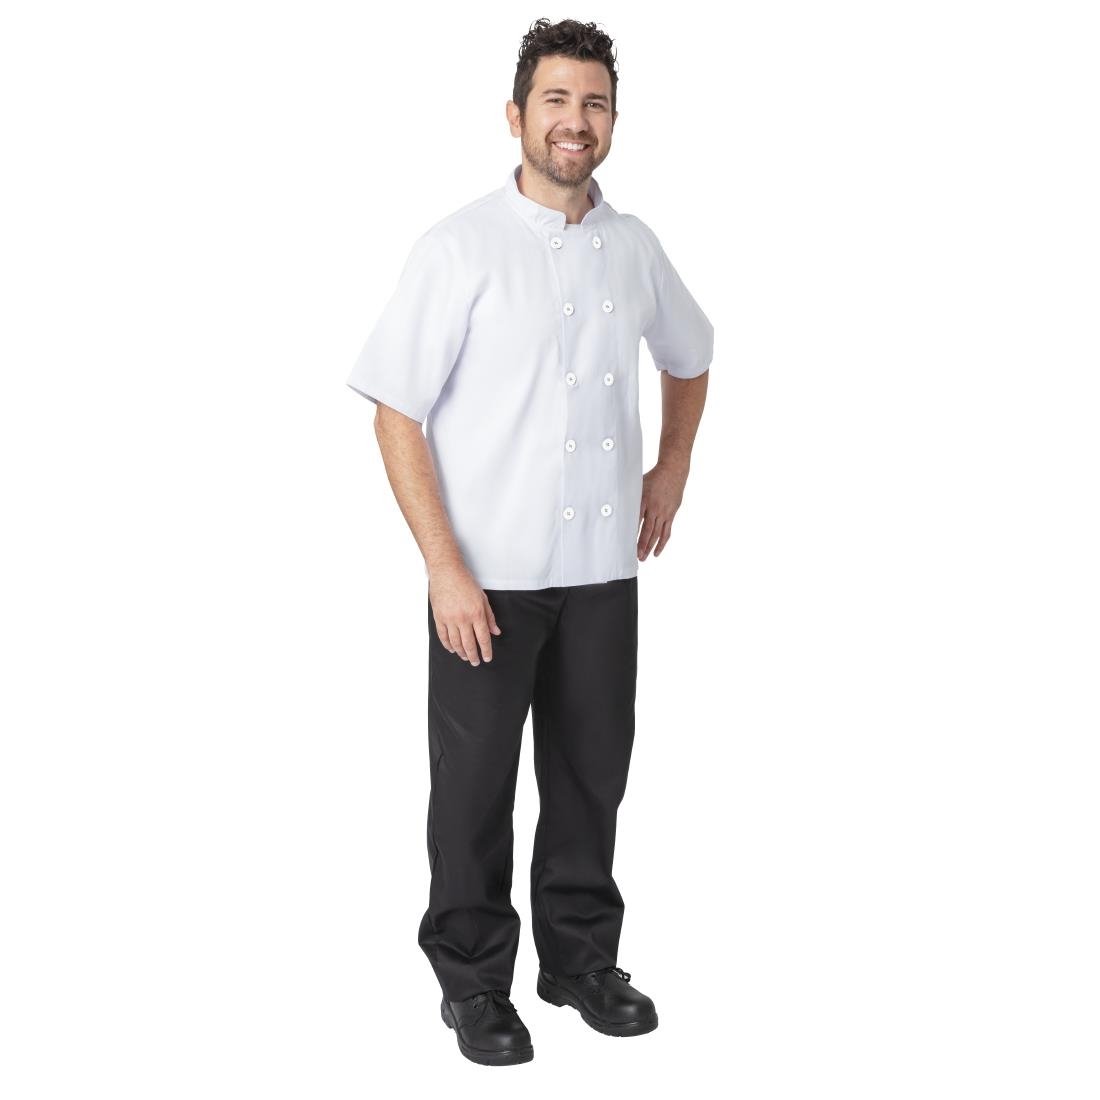 BB547-S Nisbets Essentials Short Sleeve Chefs Jacket White S (Pack of 2) JD Catering Equipment Solutions Ltd